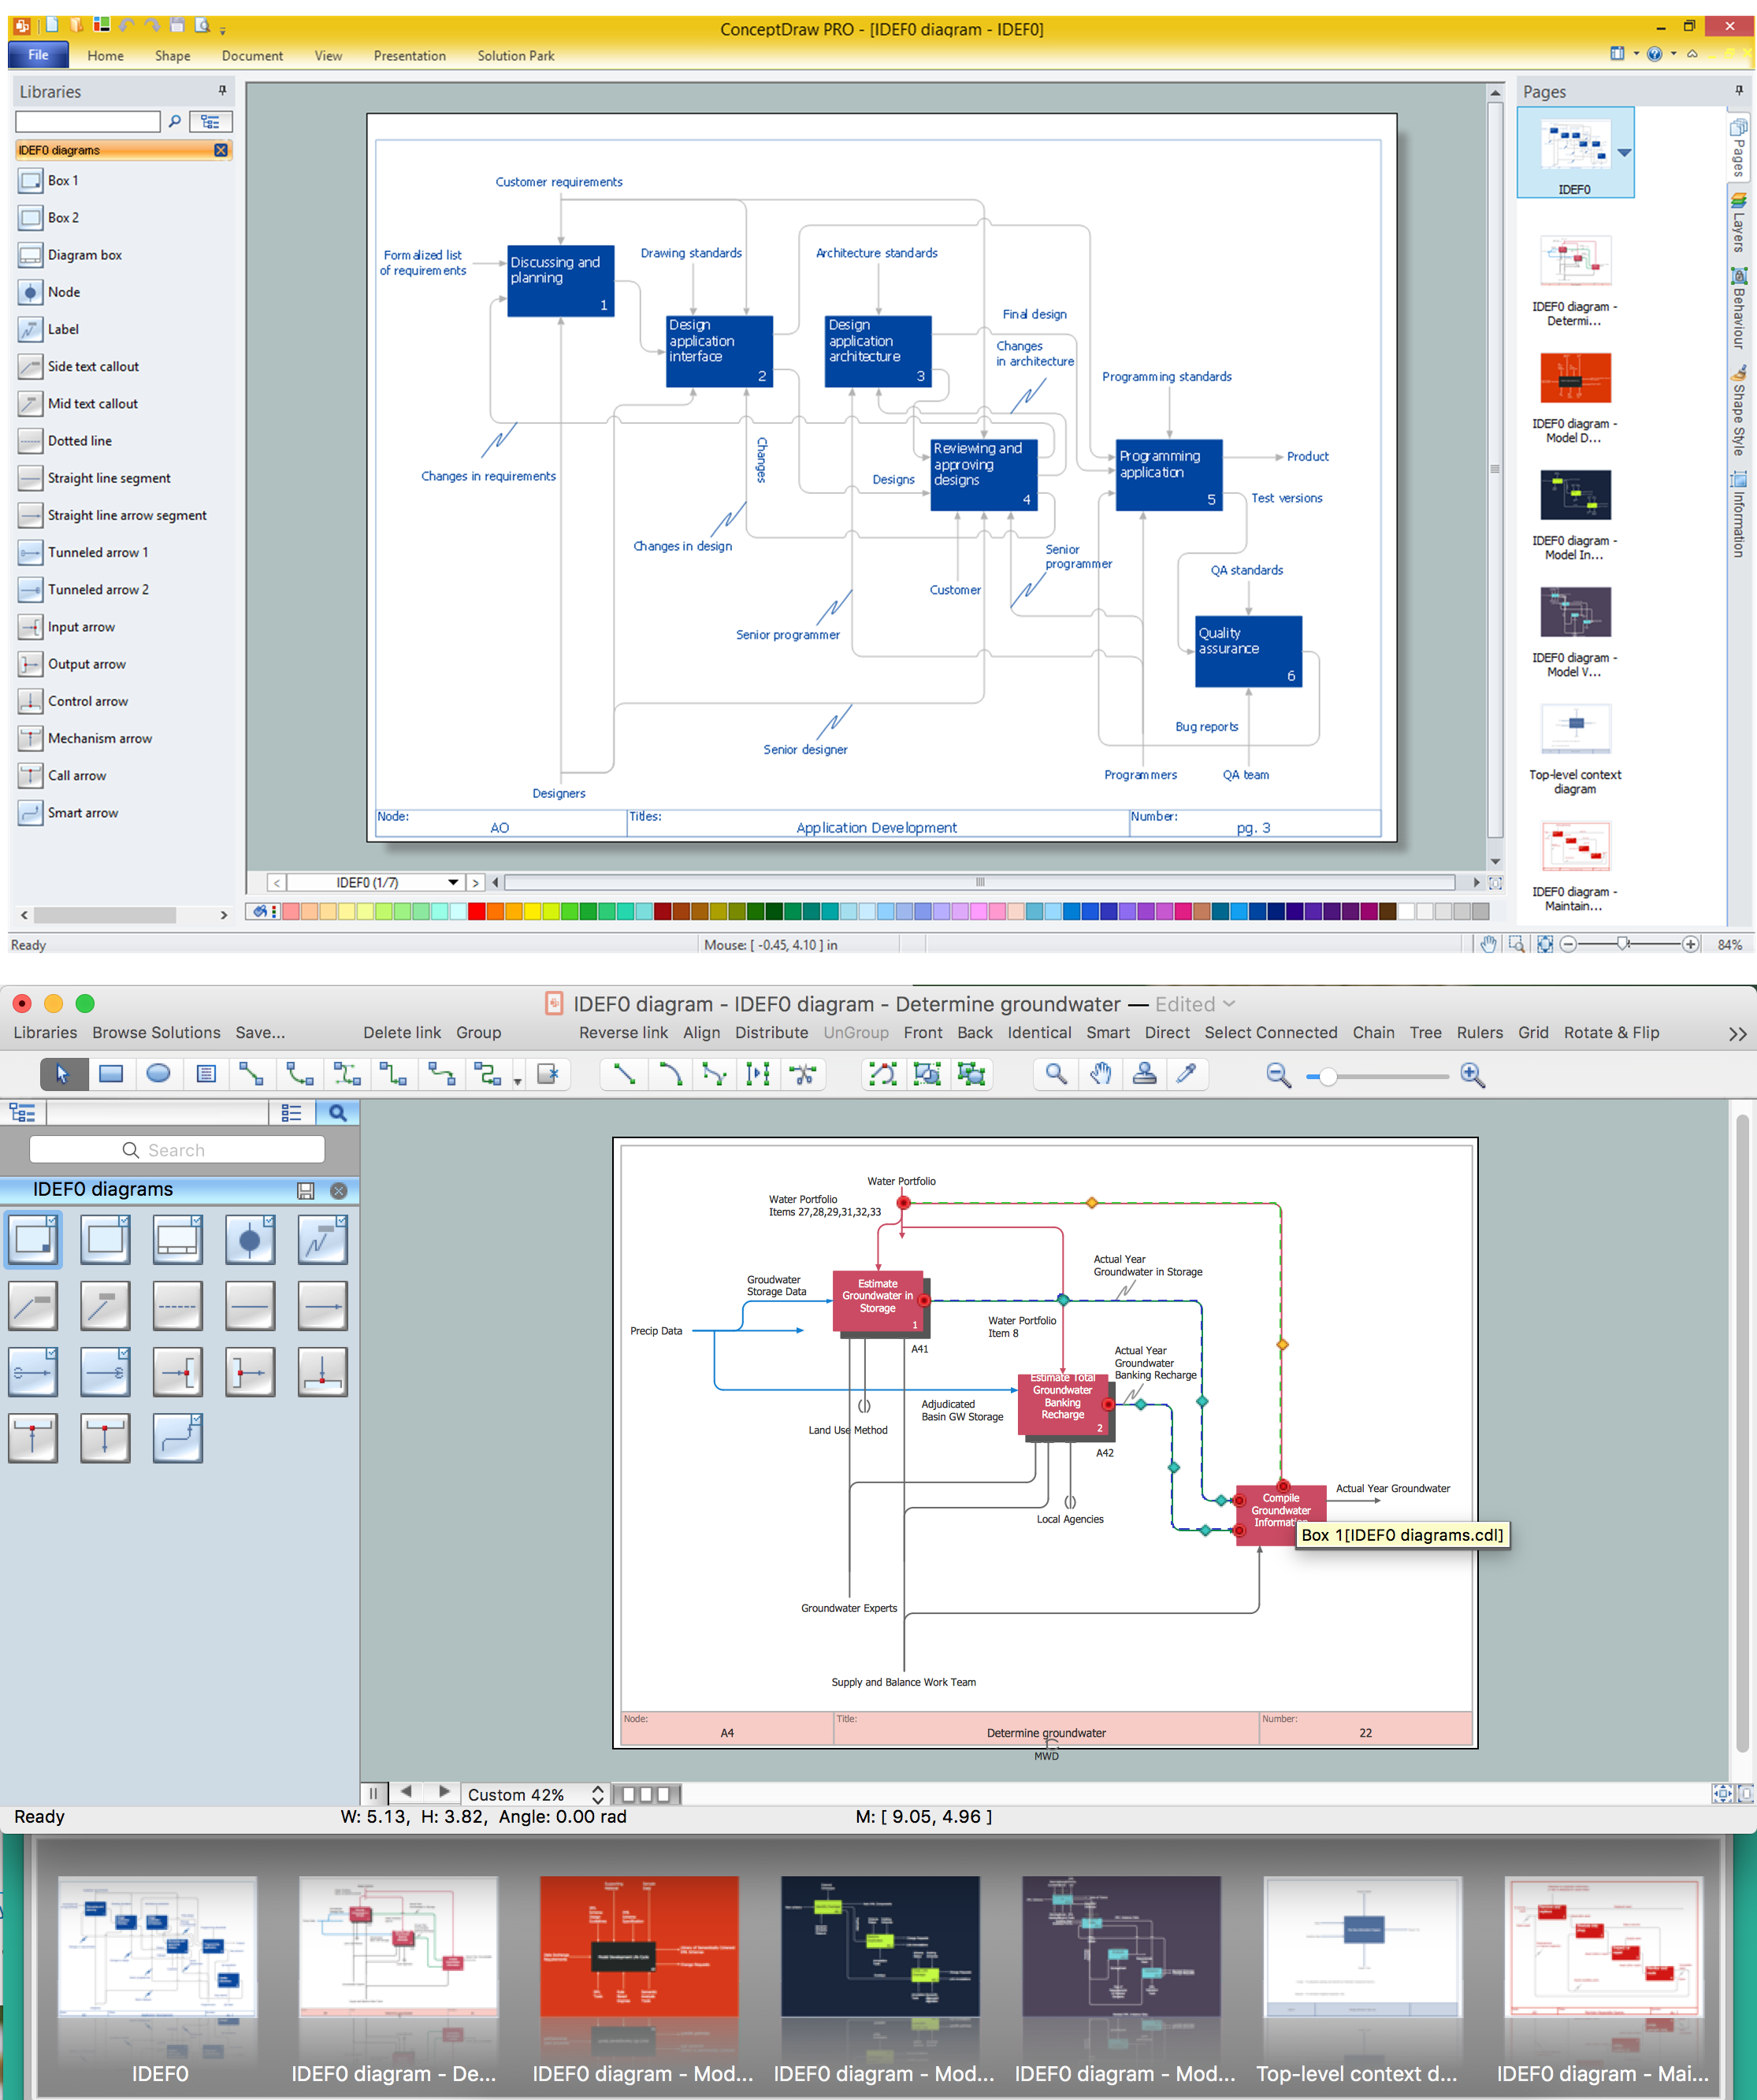 IDEF0 standard with ConceptDraw DIAGRAM *